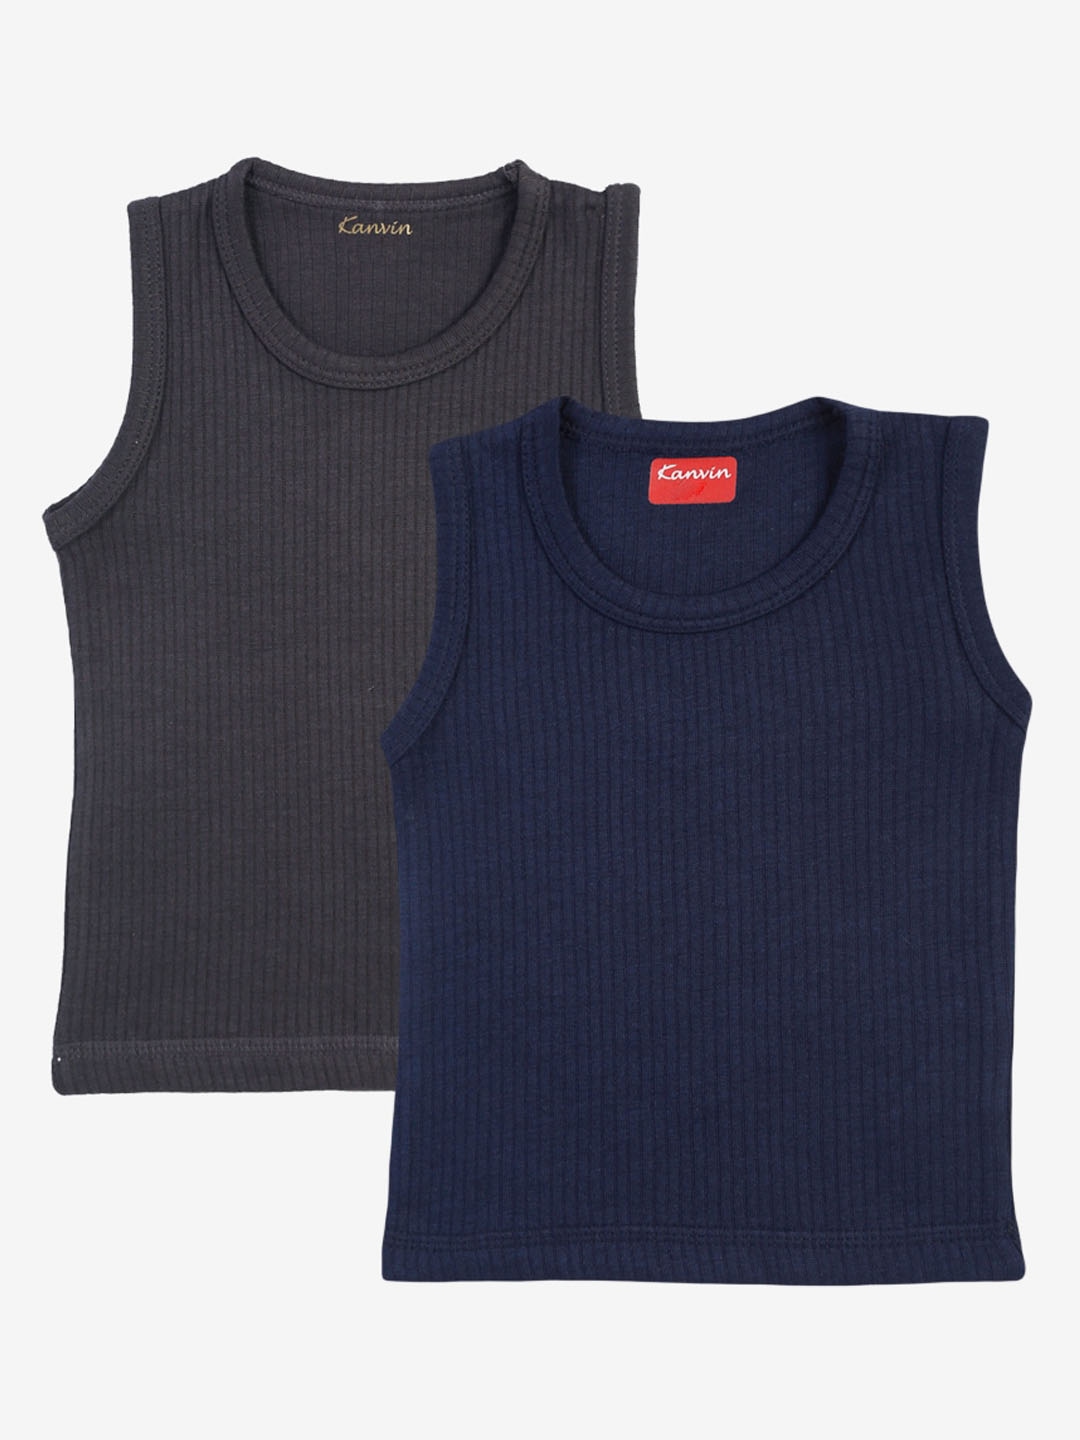 

Kanvin Boys Pack Of 2 Charcoal & Navy Blue Ribbed Cotton Thermal Tops